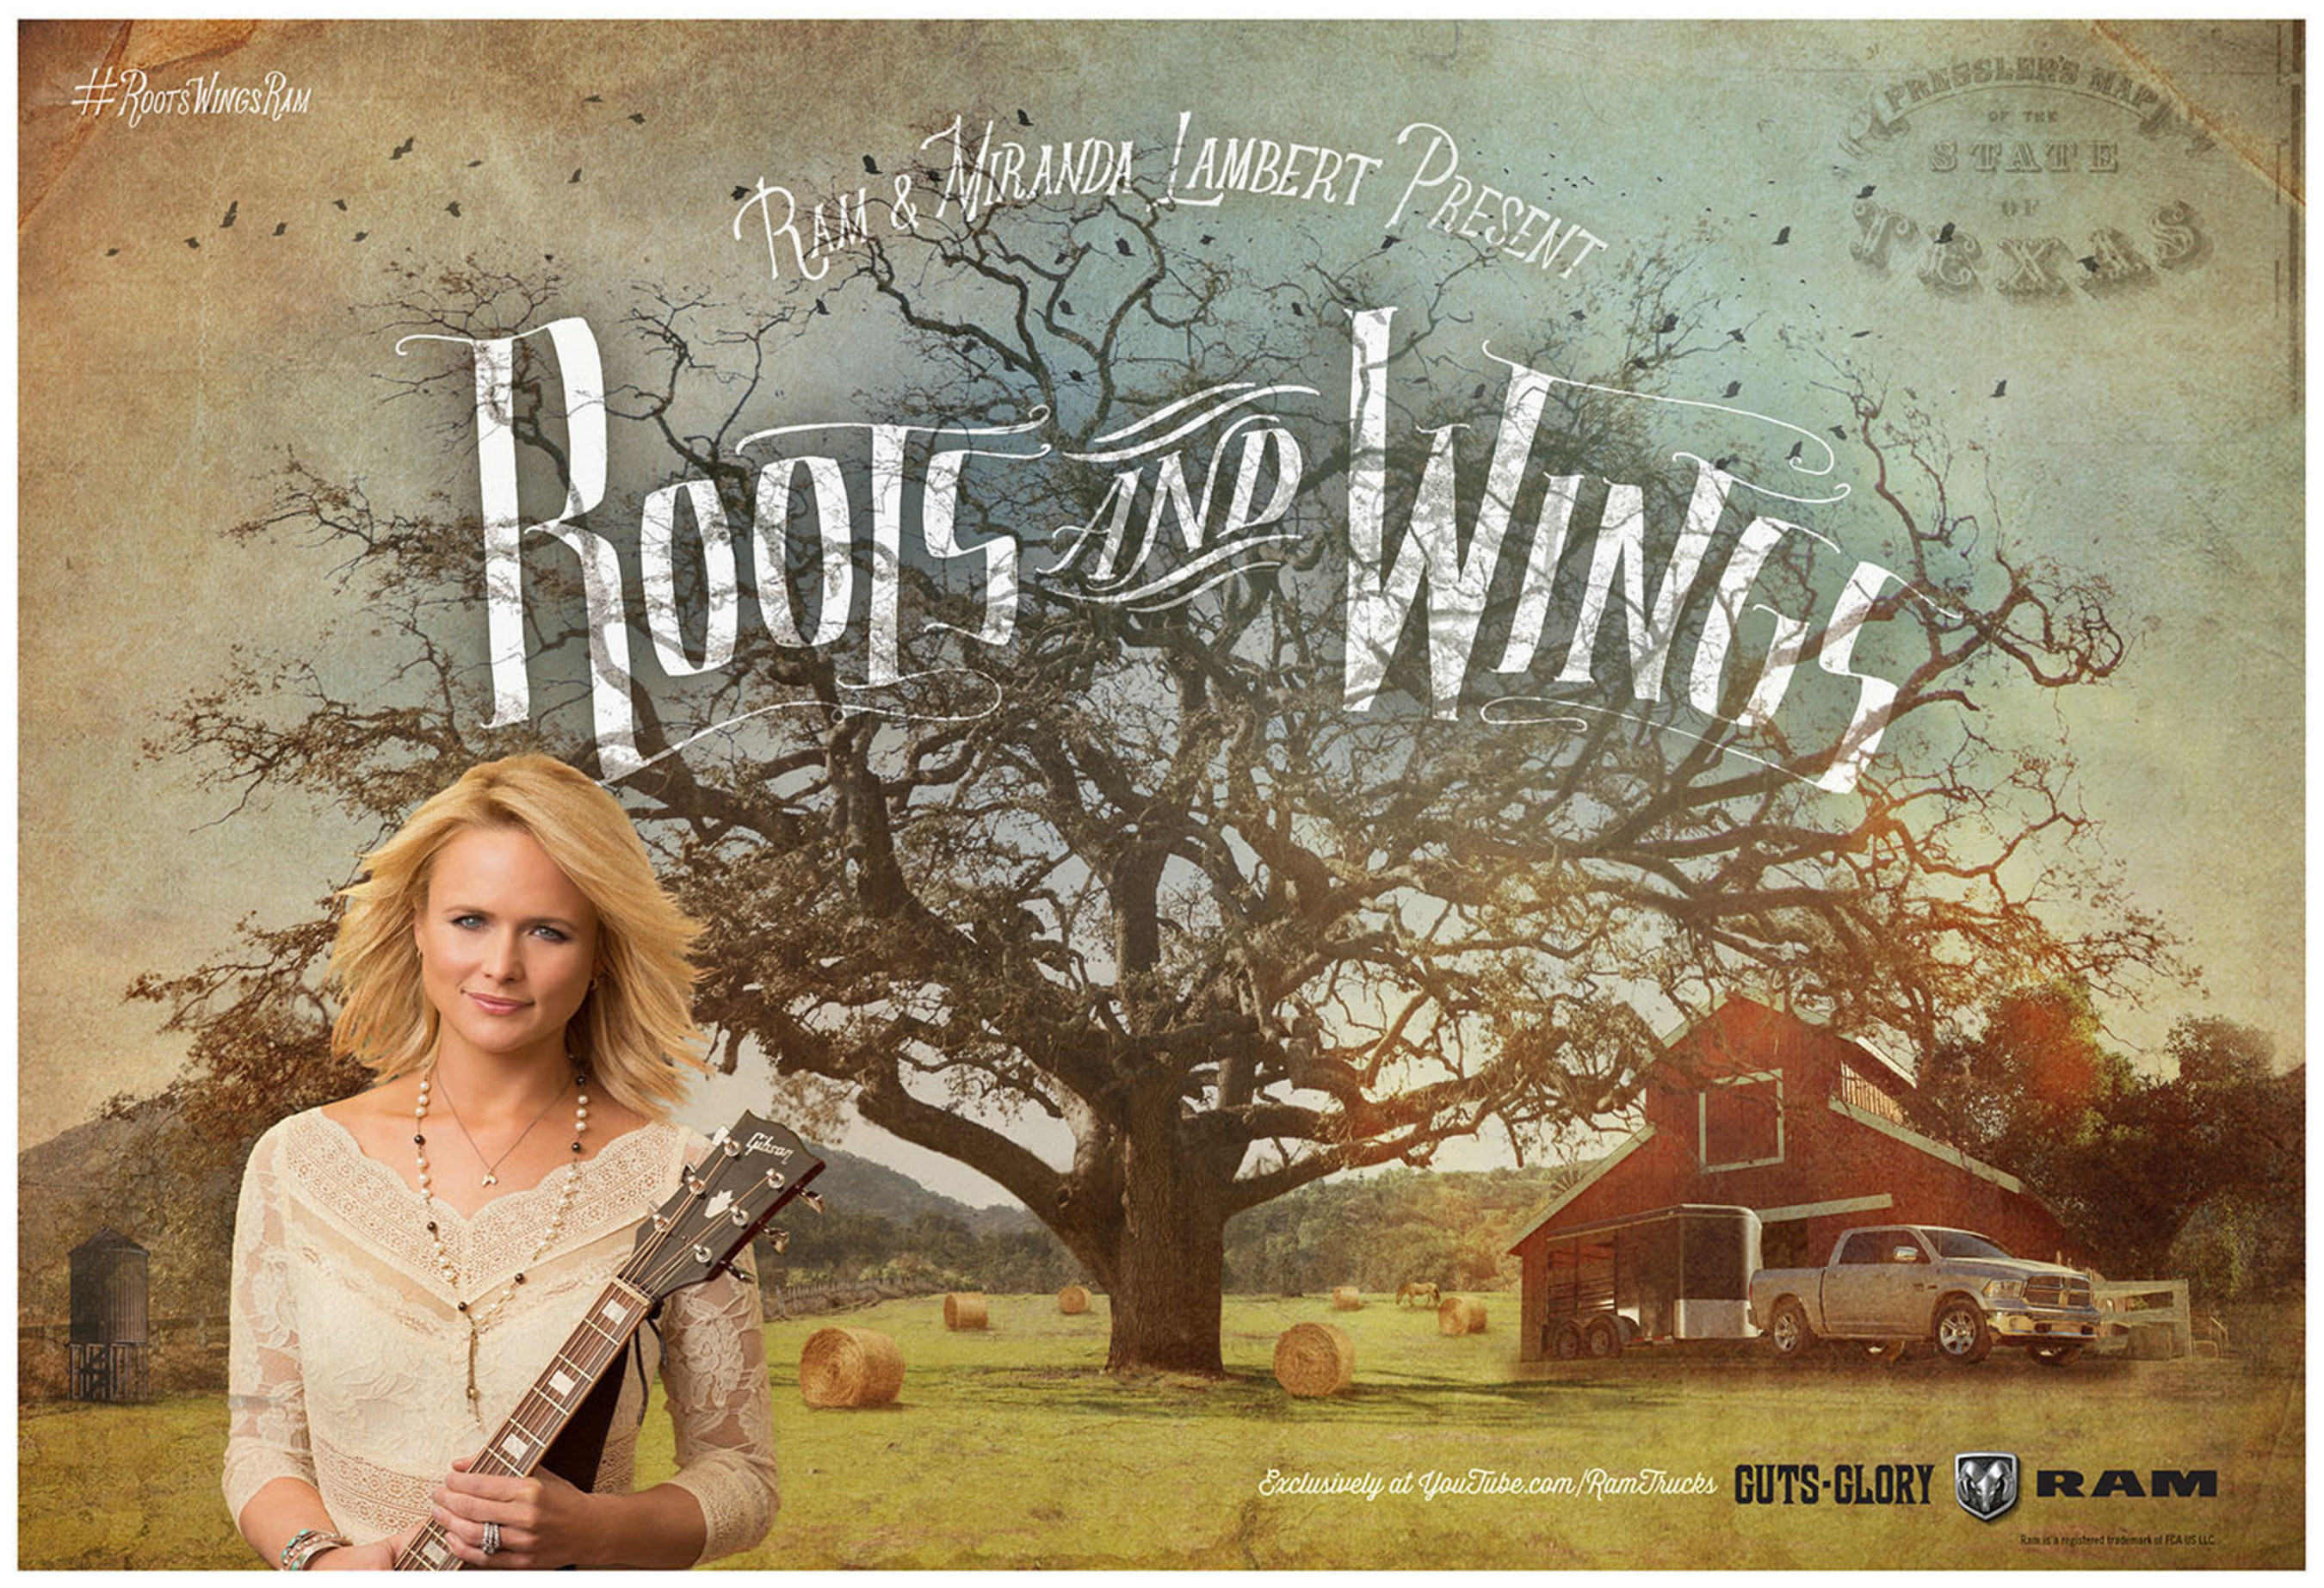 Ram Trucks has launched a new marketing campaign featuring Grammy Award-winner Miranda Lambert singing "Roots and Wings," a song she wrote exclusively for the campaign. Lambert says the song was inspired by what the Ram brand stands for and is a personal story about where she came from and where she is going.